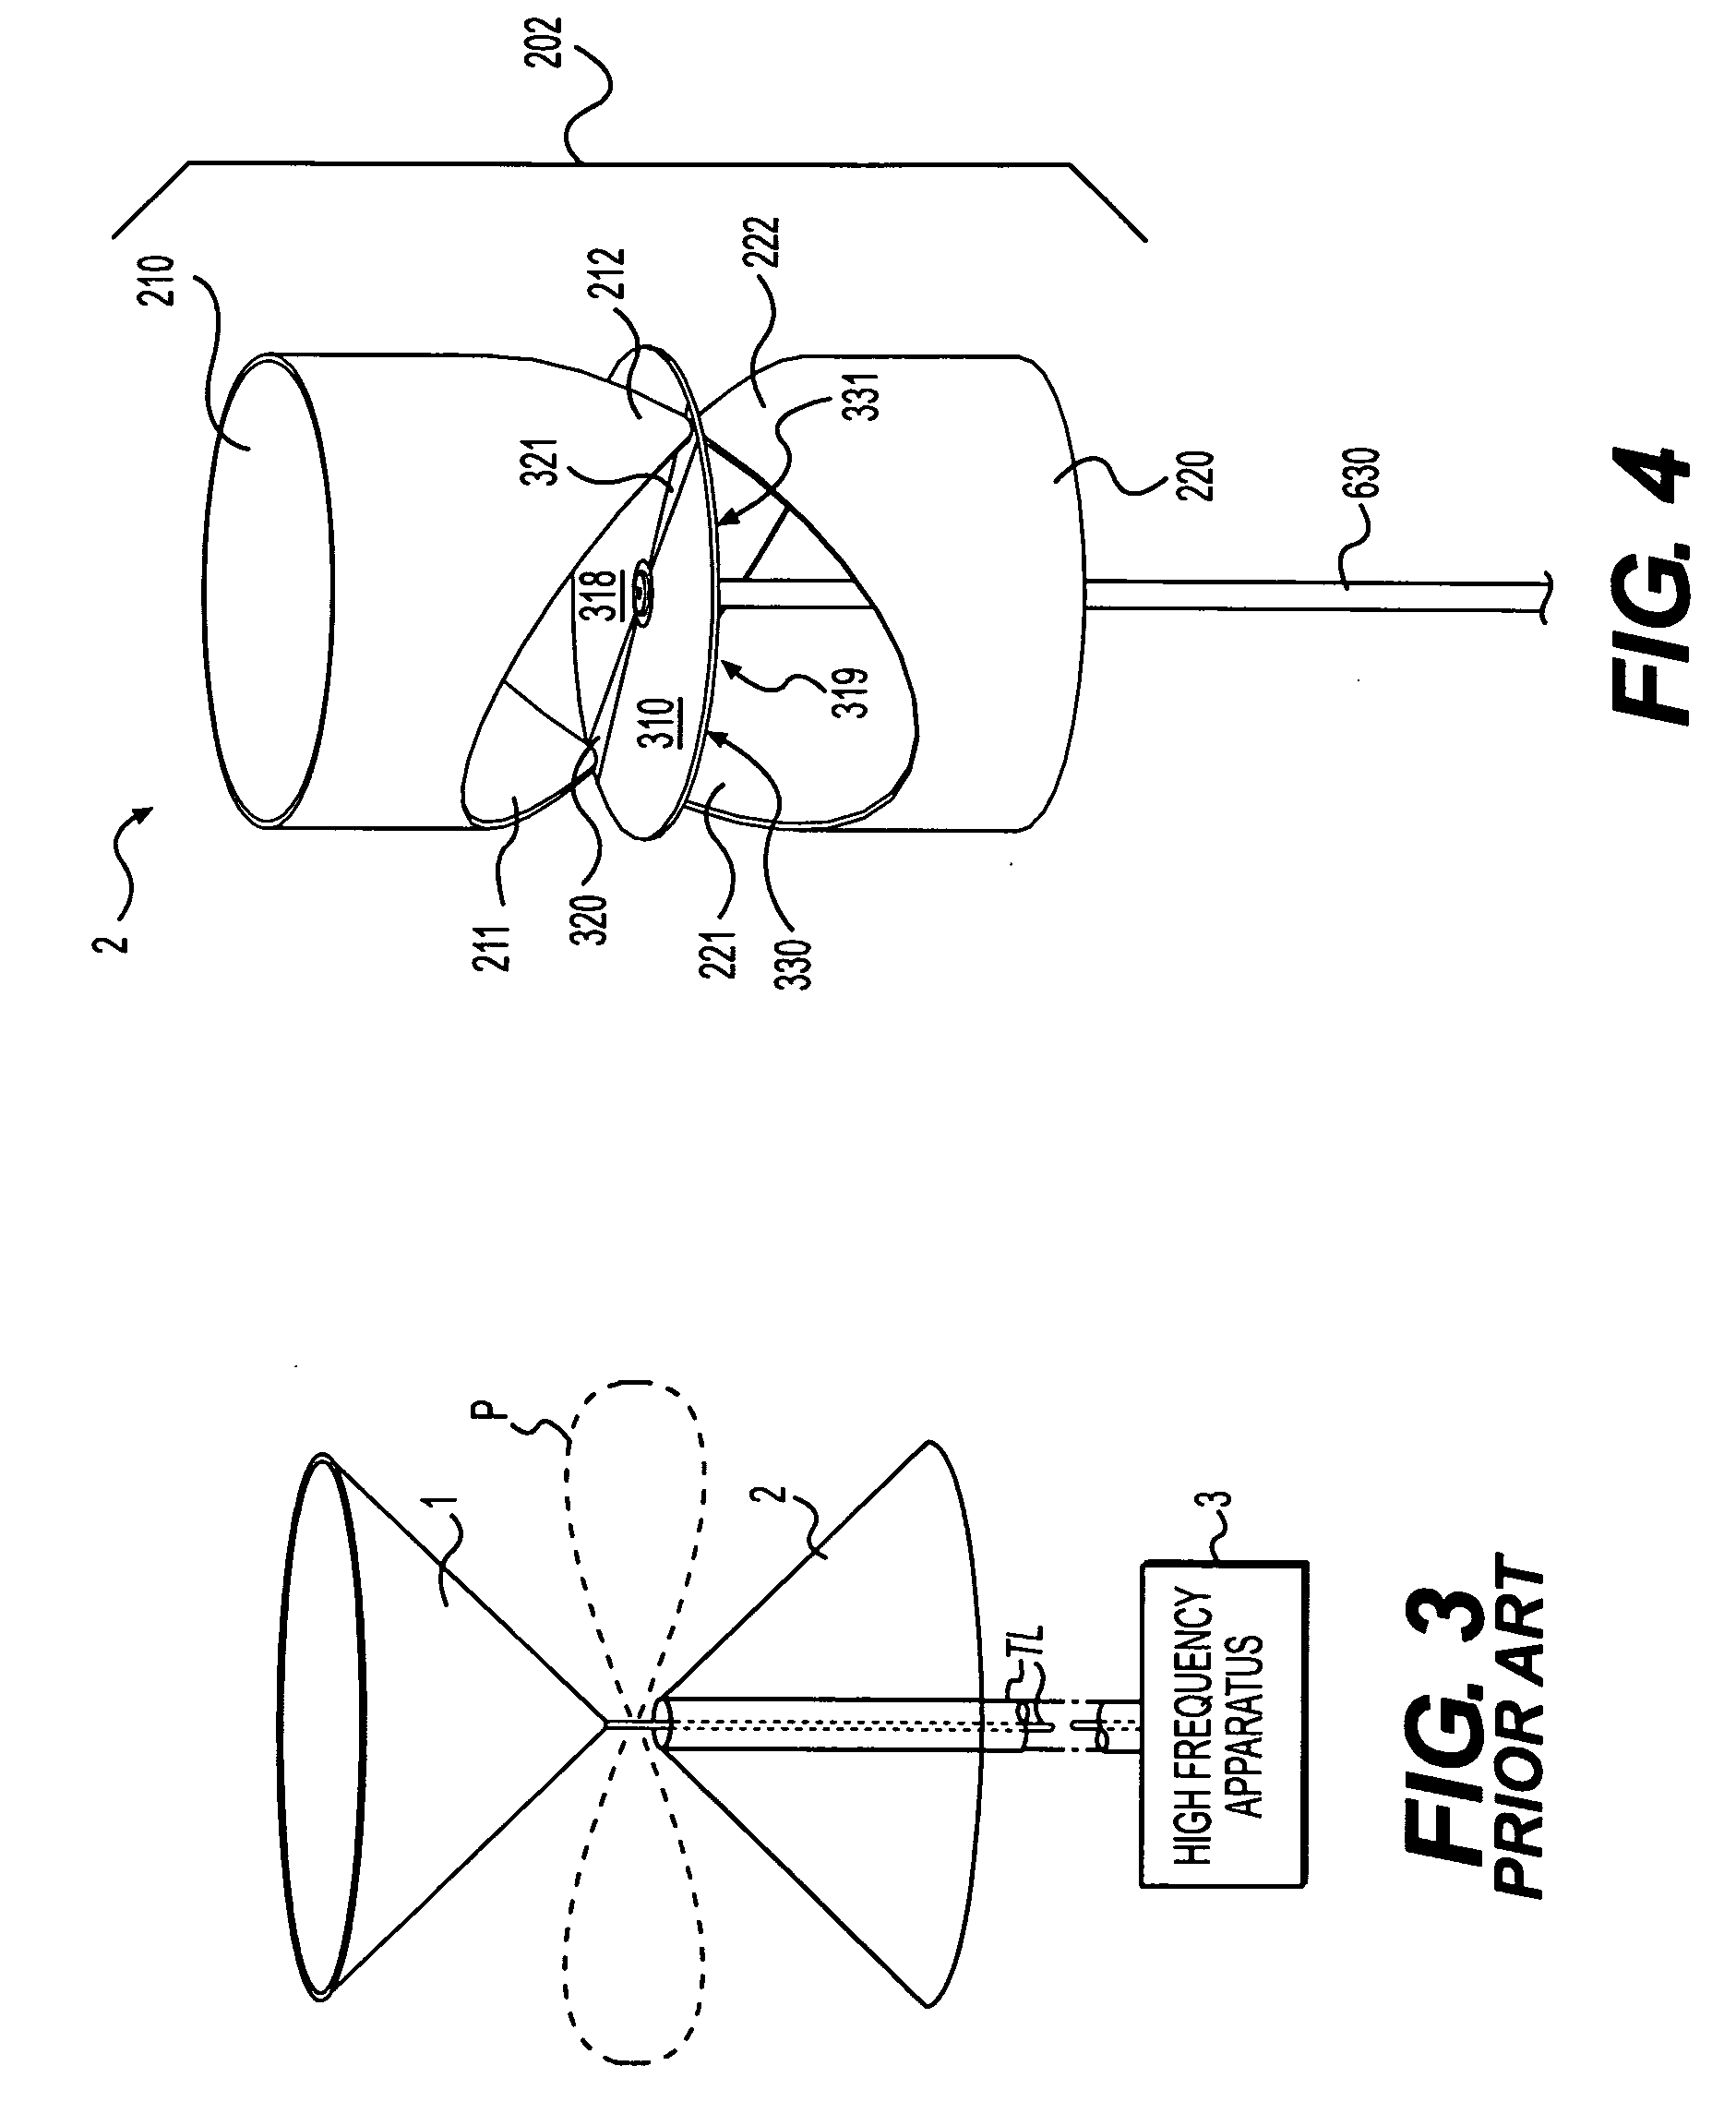 Broadband antenna system allowing multiple stacked collinear devices